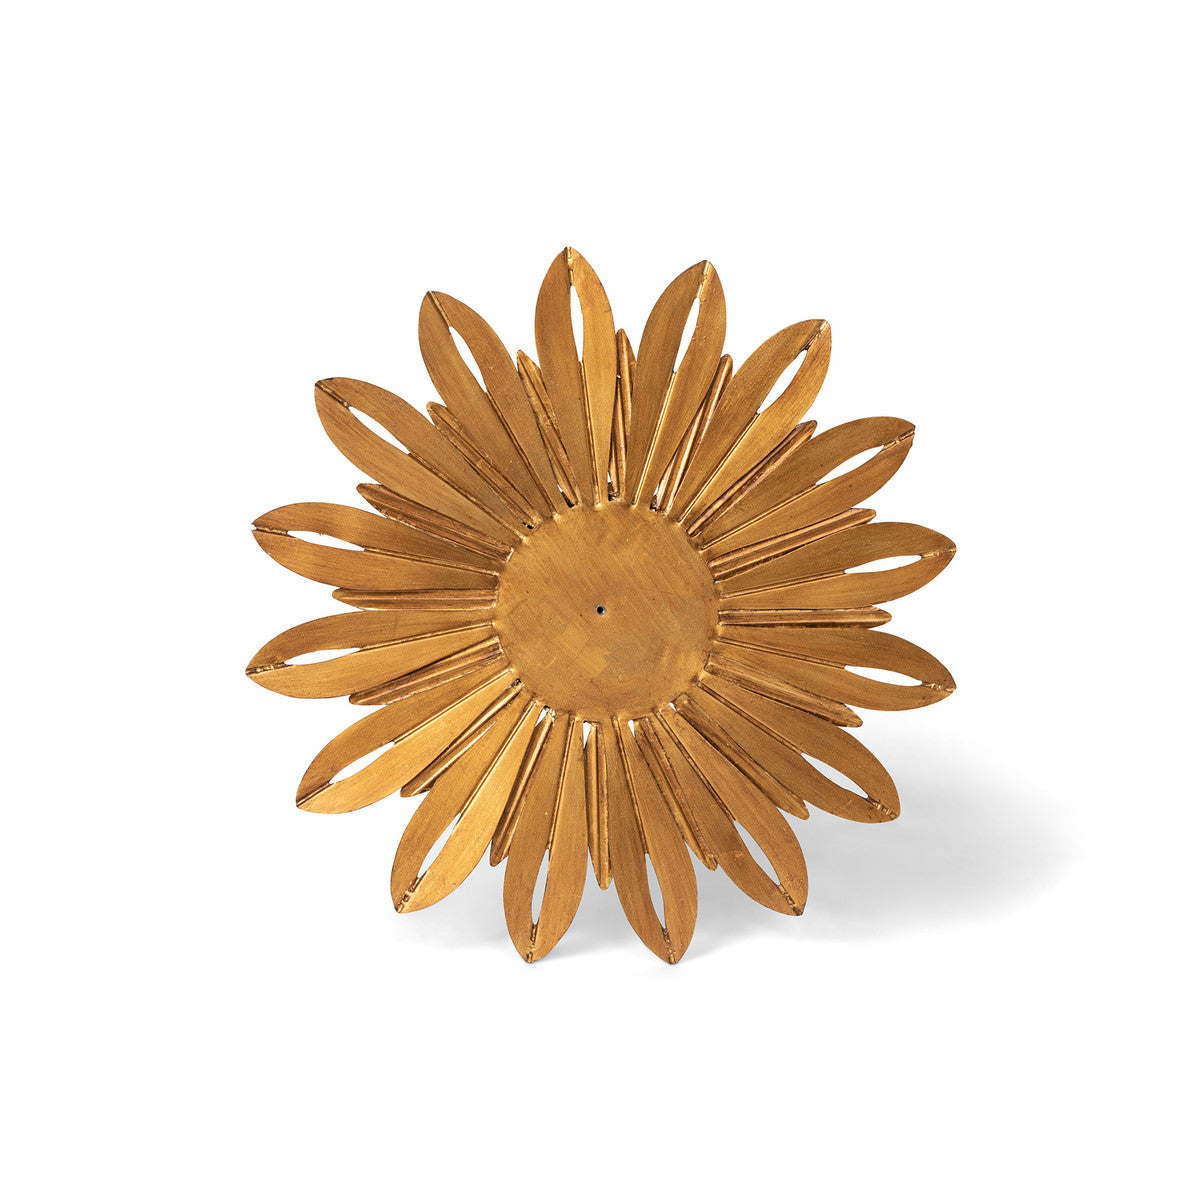 Aged Copper Wall Sunflower, Small